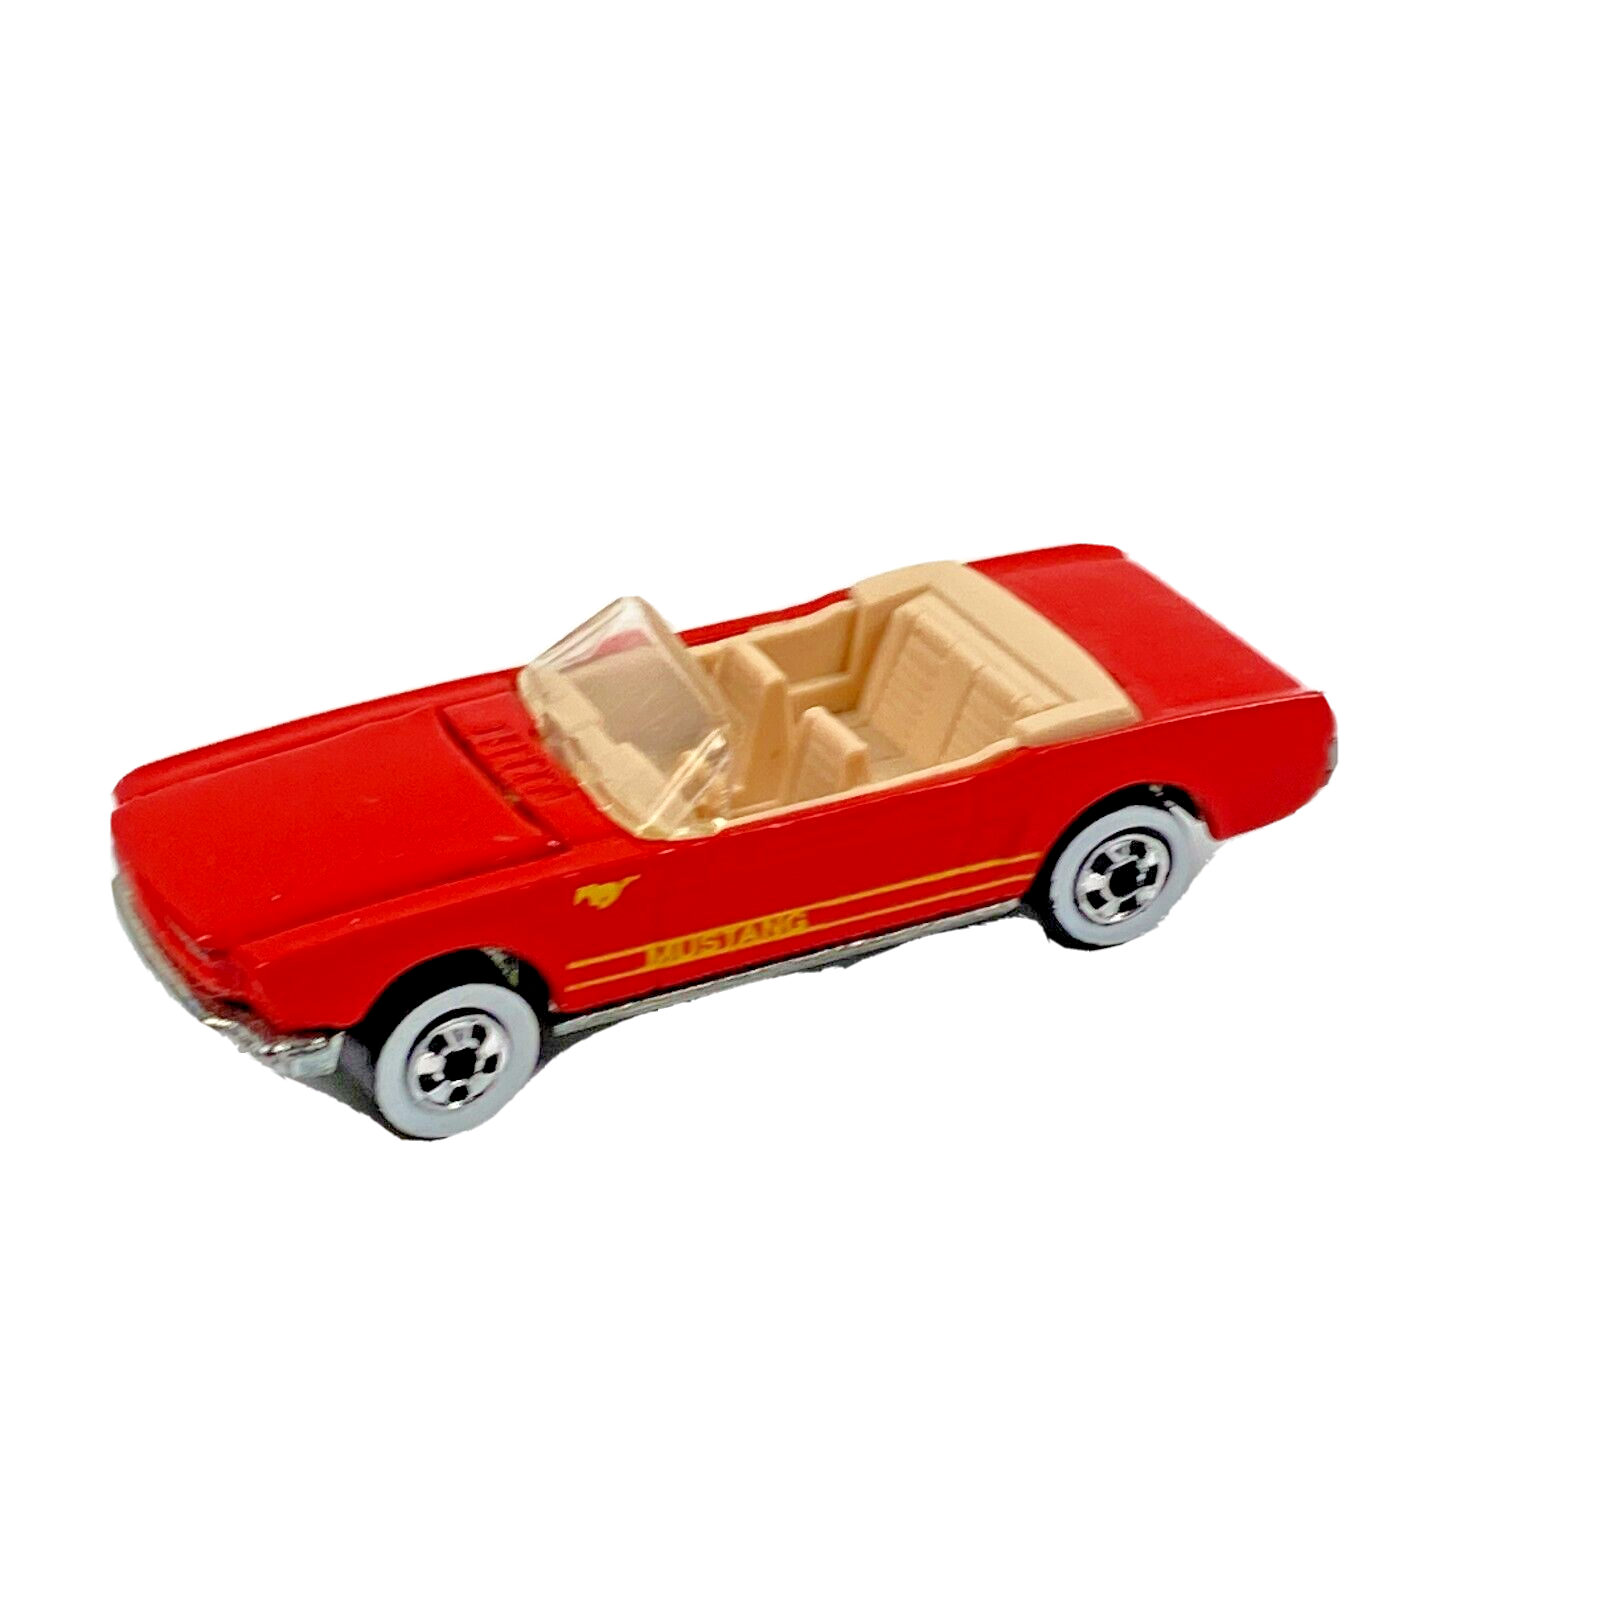 Hot Wheels Mattel 65 Ford Mustang Convertible 1983 Red Diecast Toy Car - $8.79